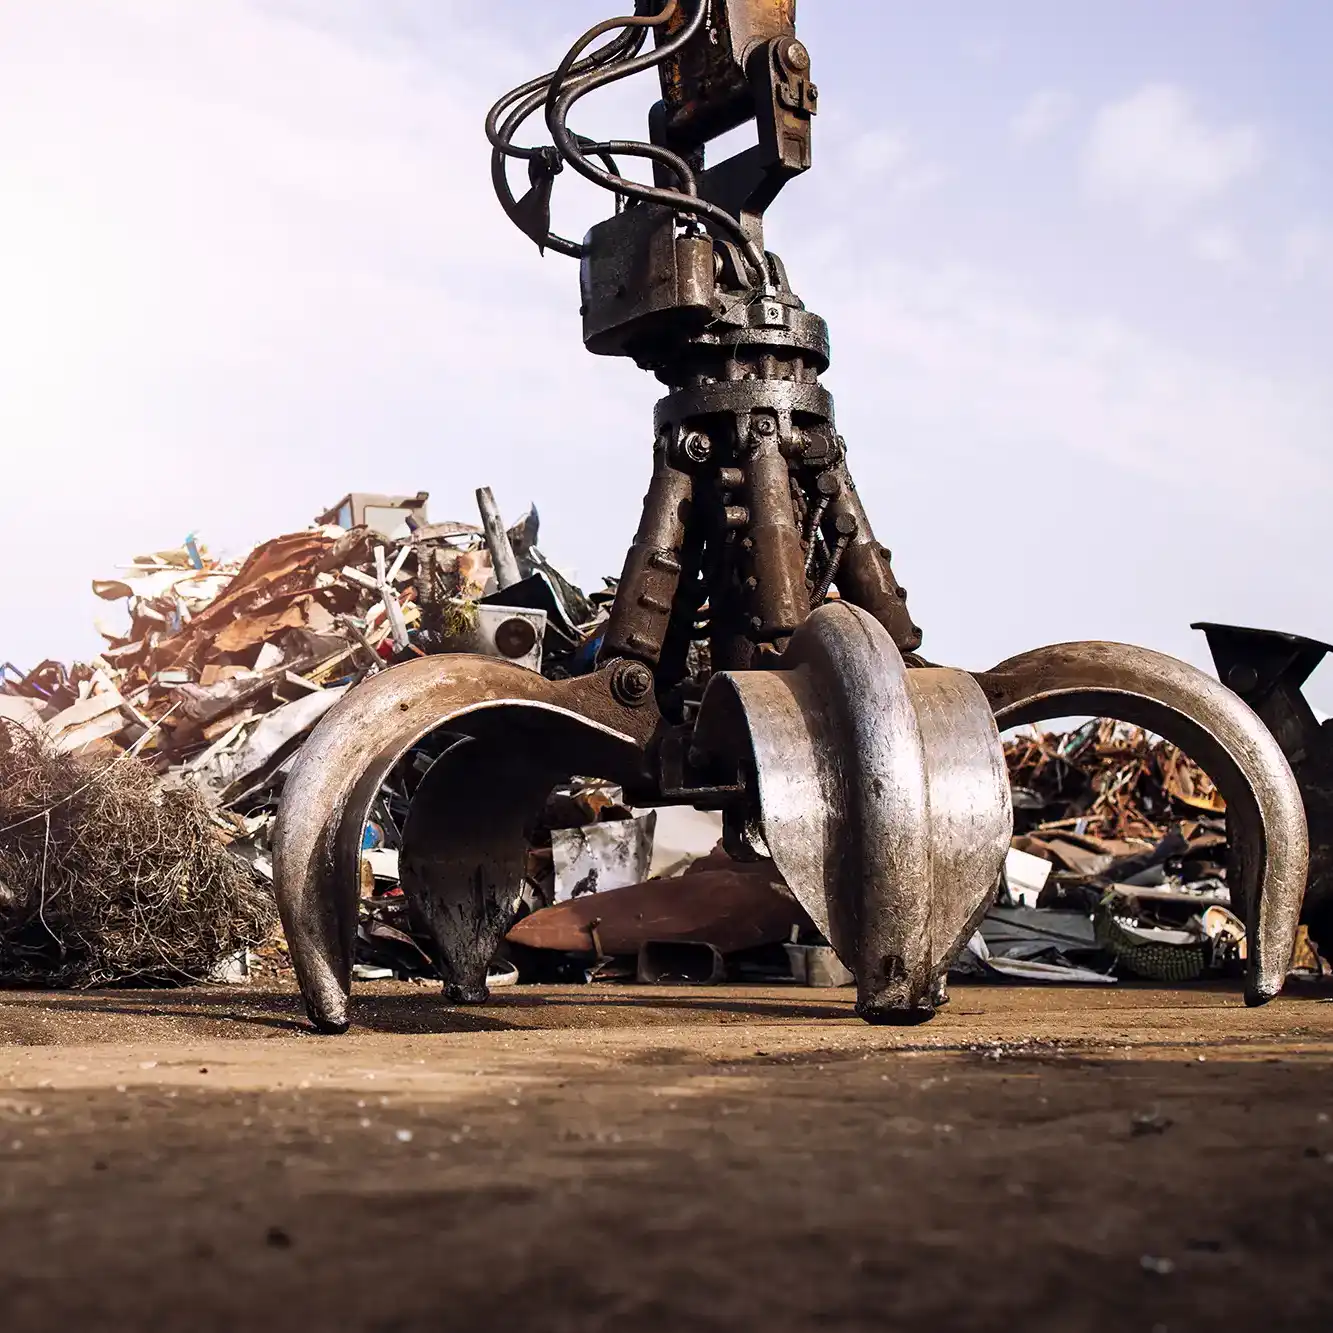 a large metal object sitting on top of a pile of junk